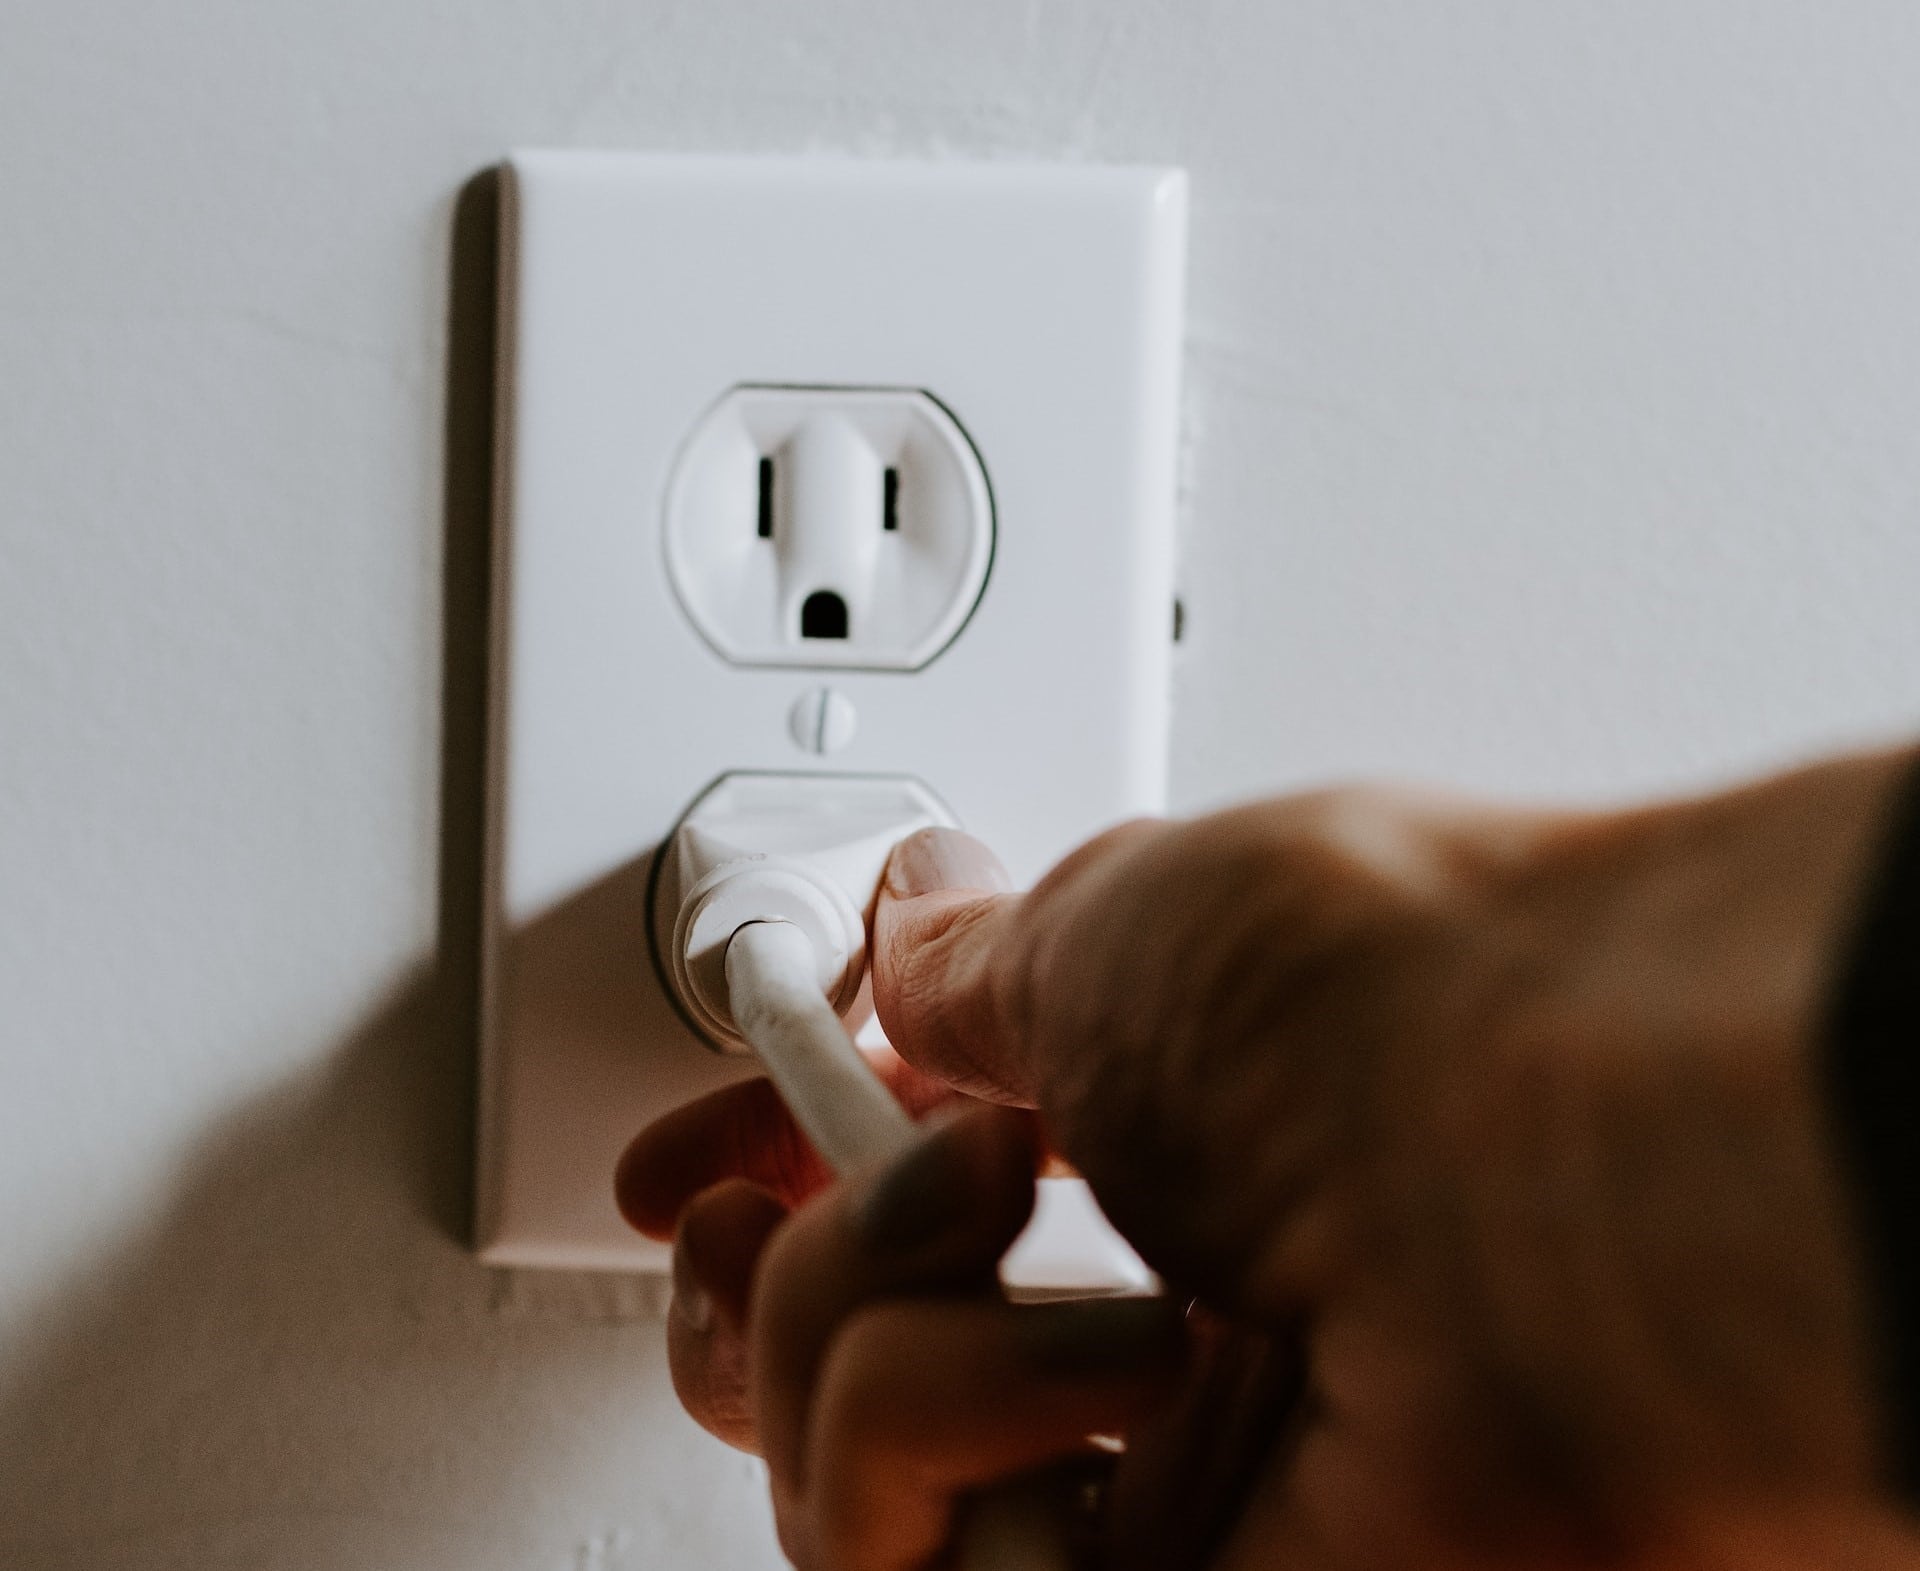 close-up of a hand plugging a cord into an electrical outlet in a home